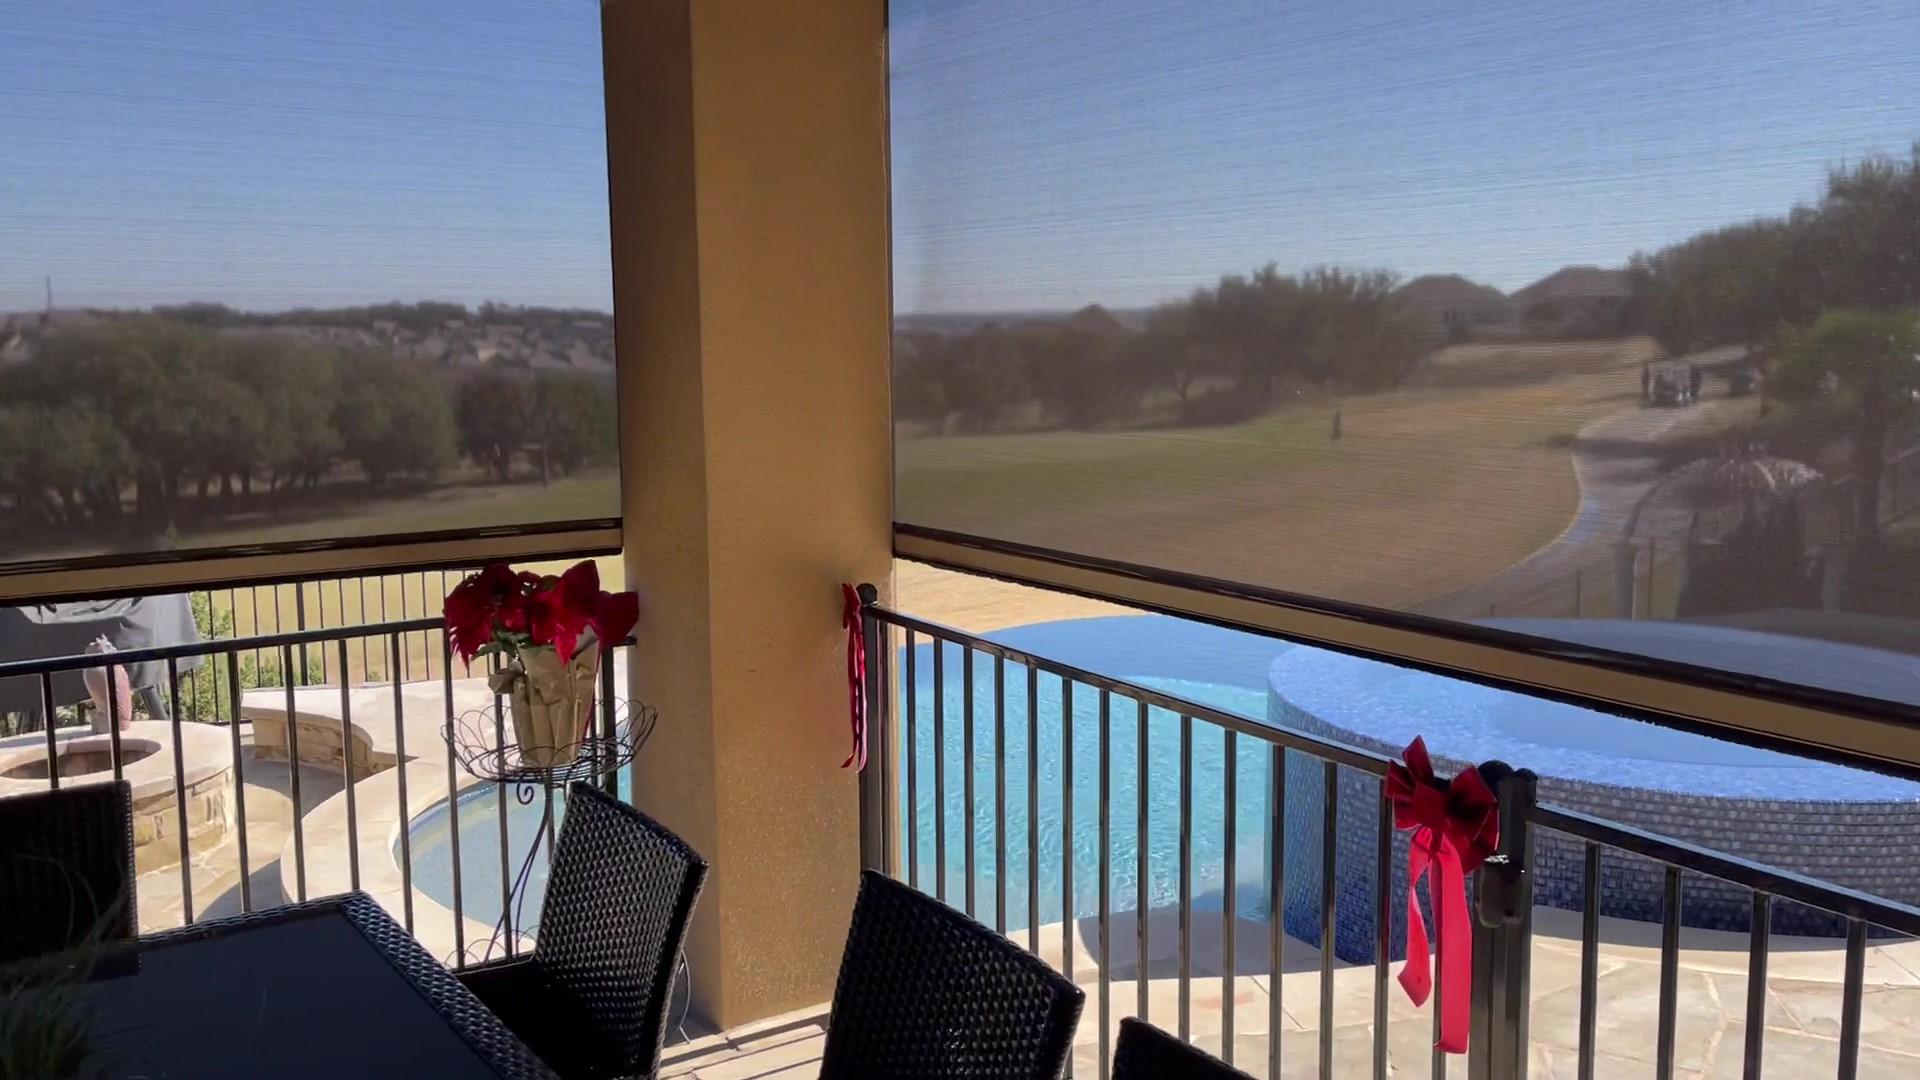 Home with patio shades in Texas